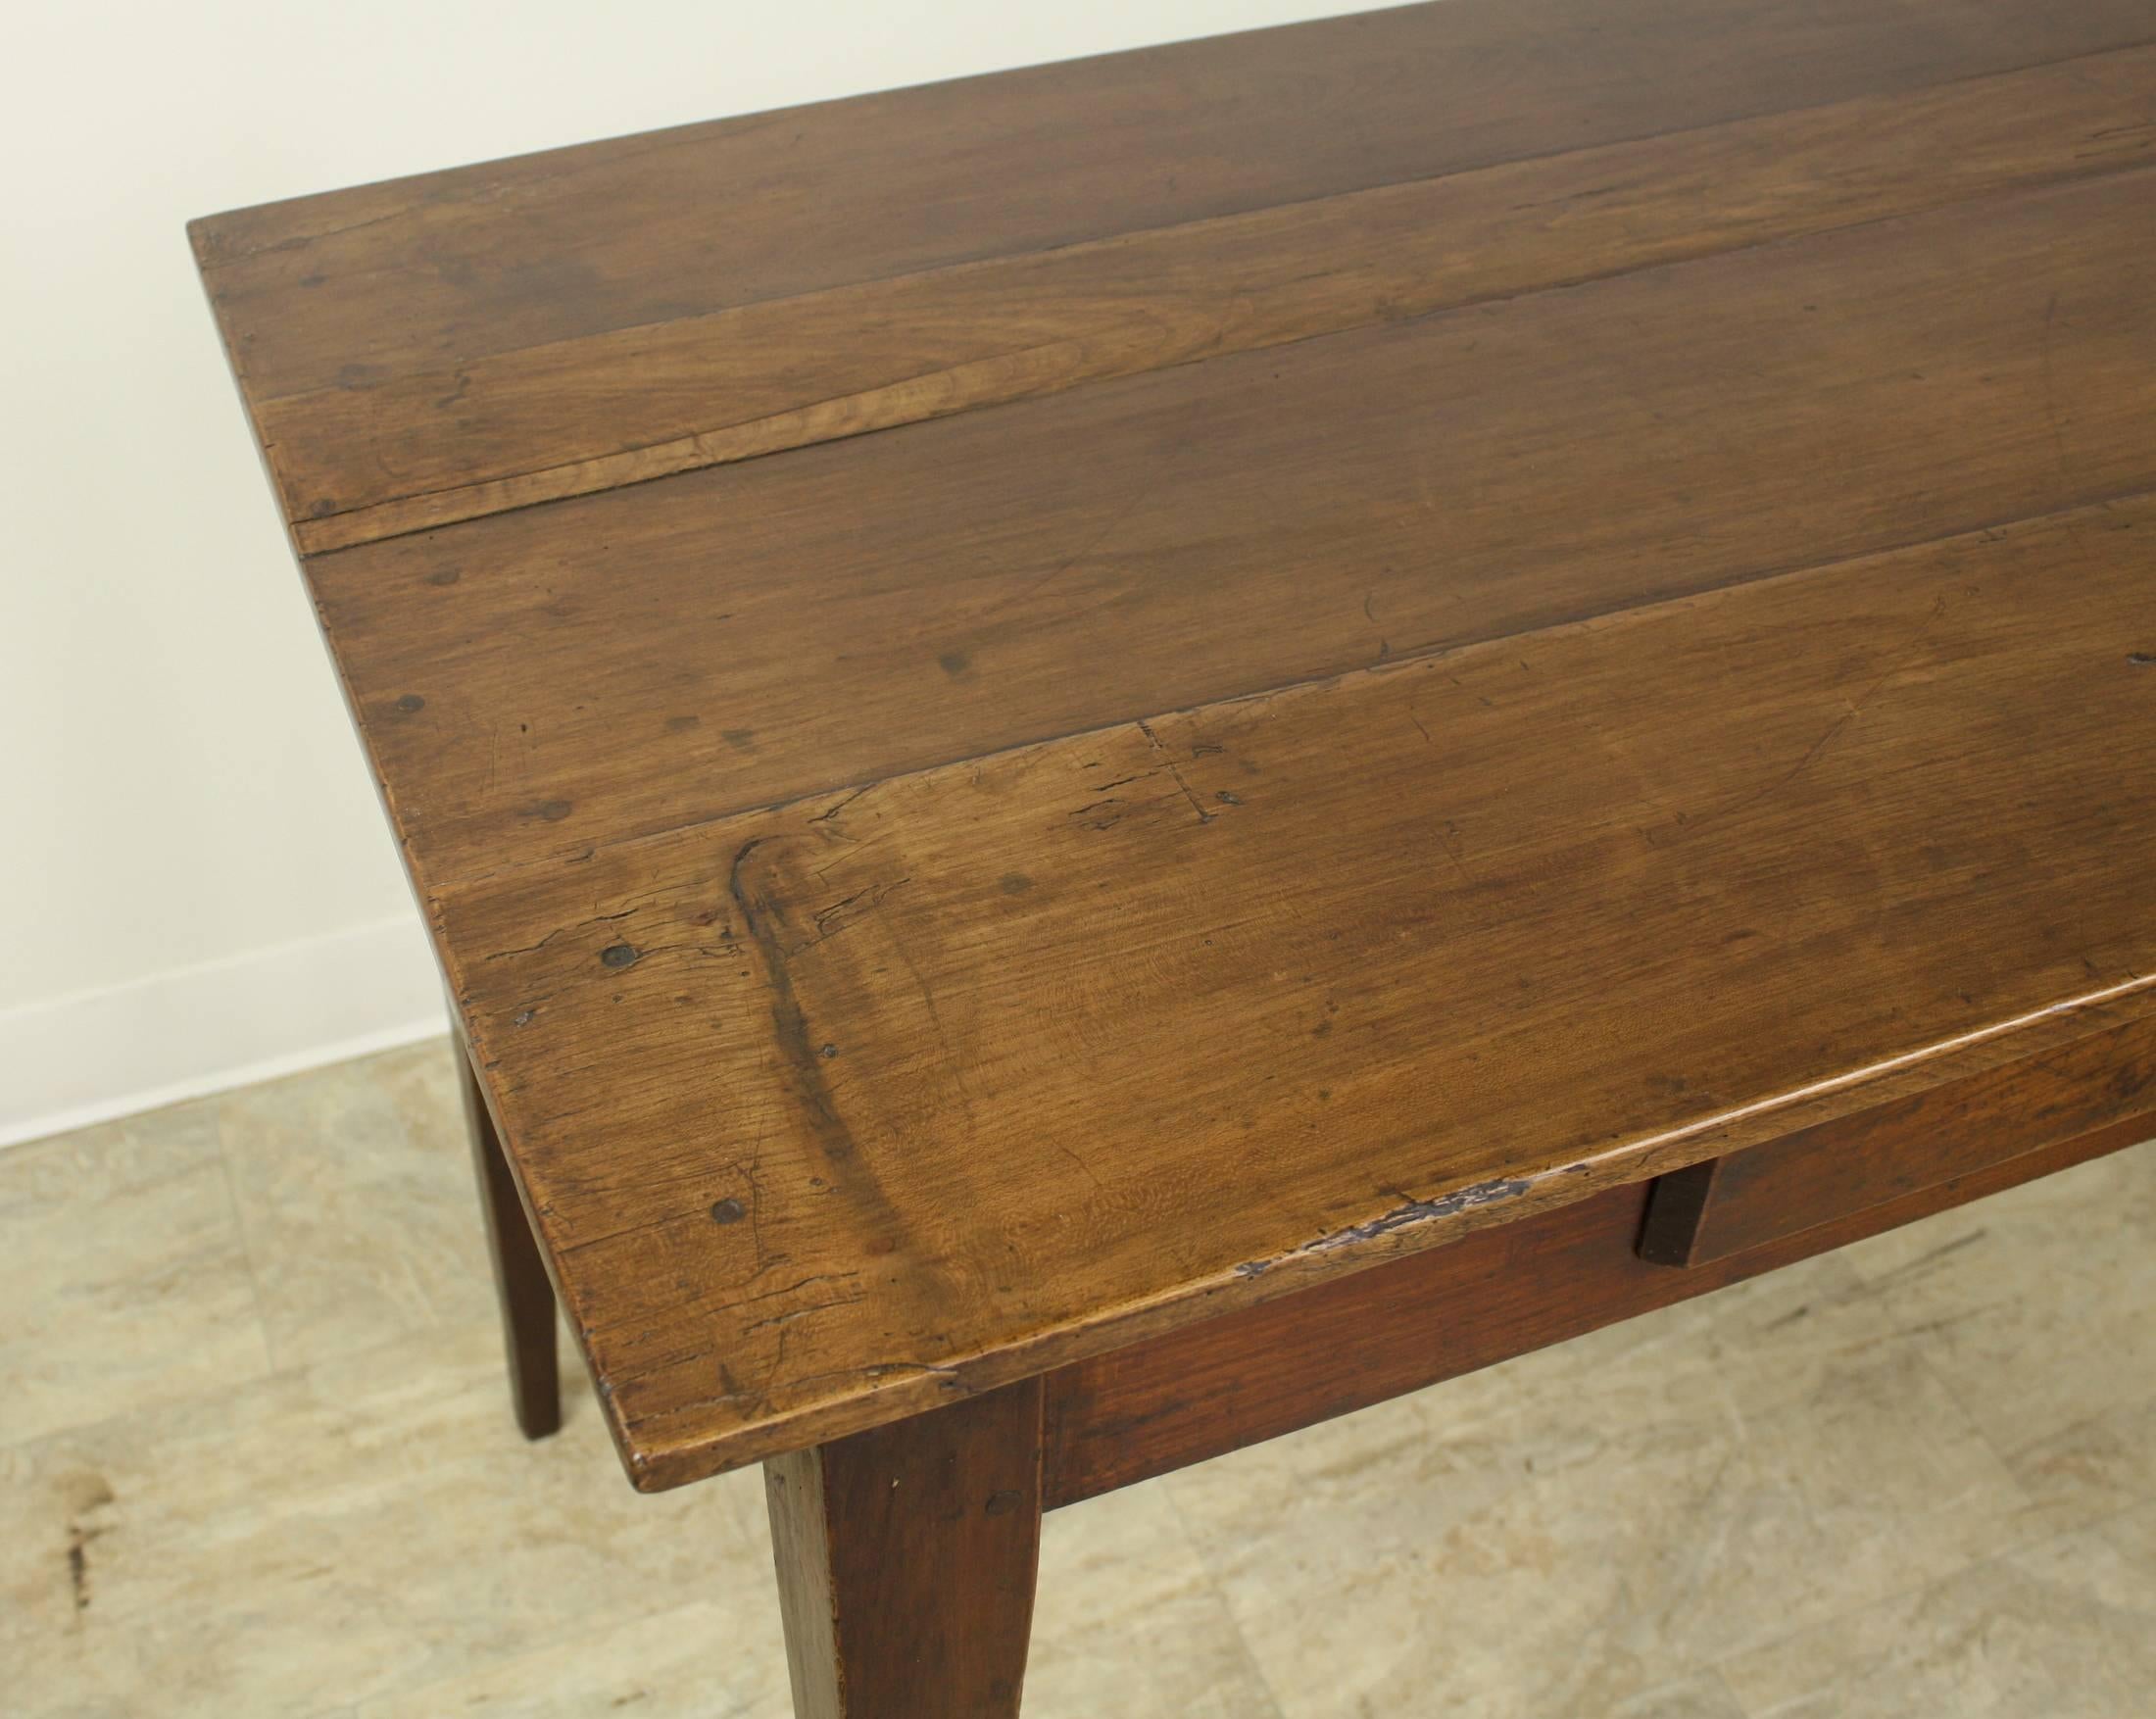 19th Century Antique French Cherry Side Table or Small Desk